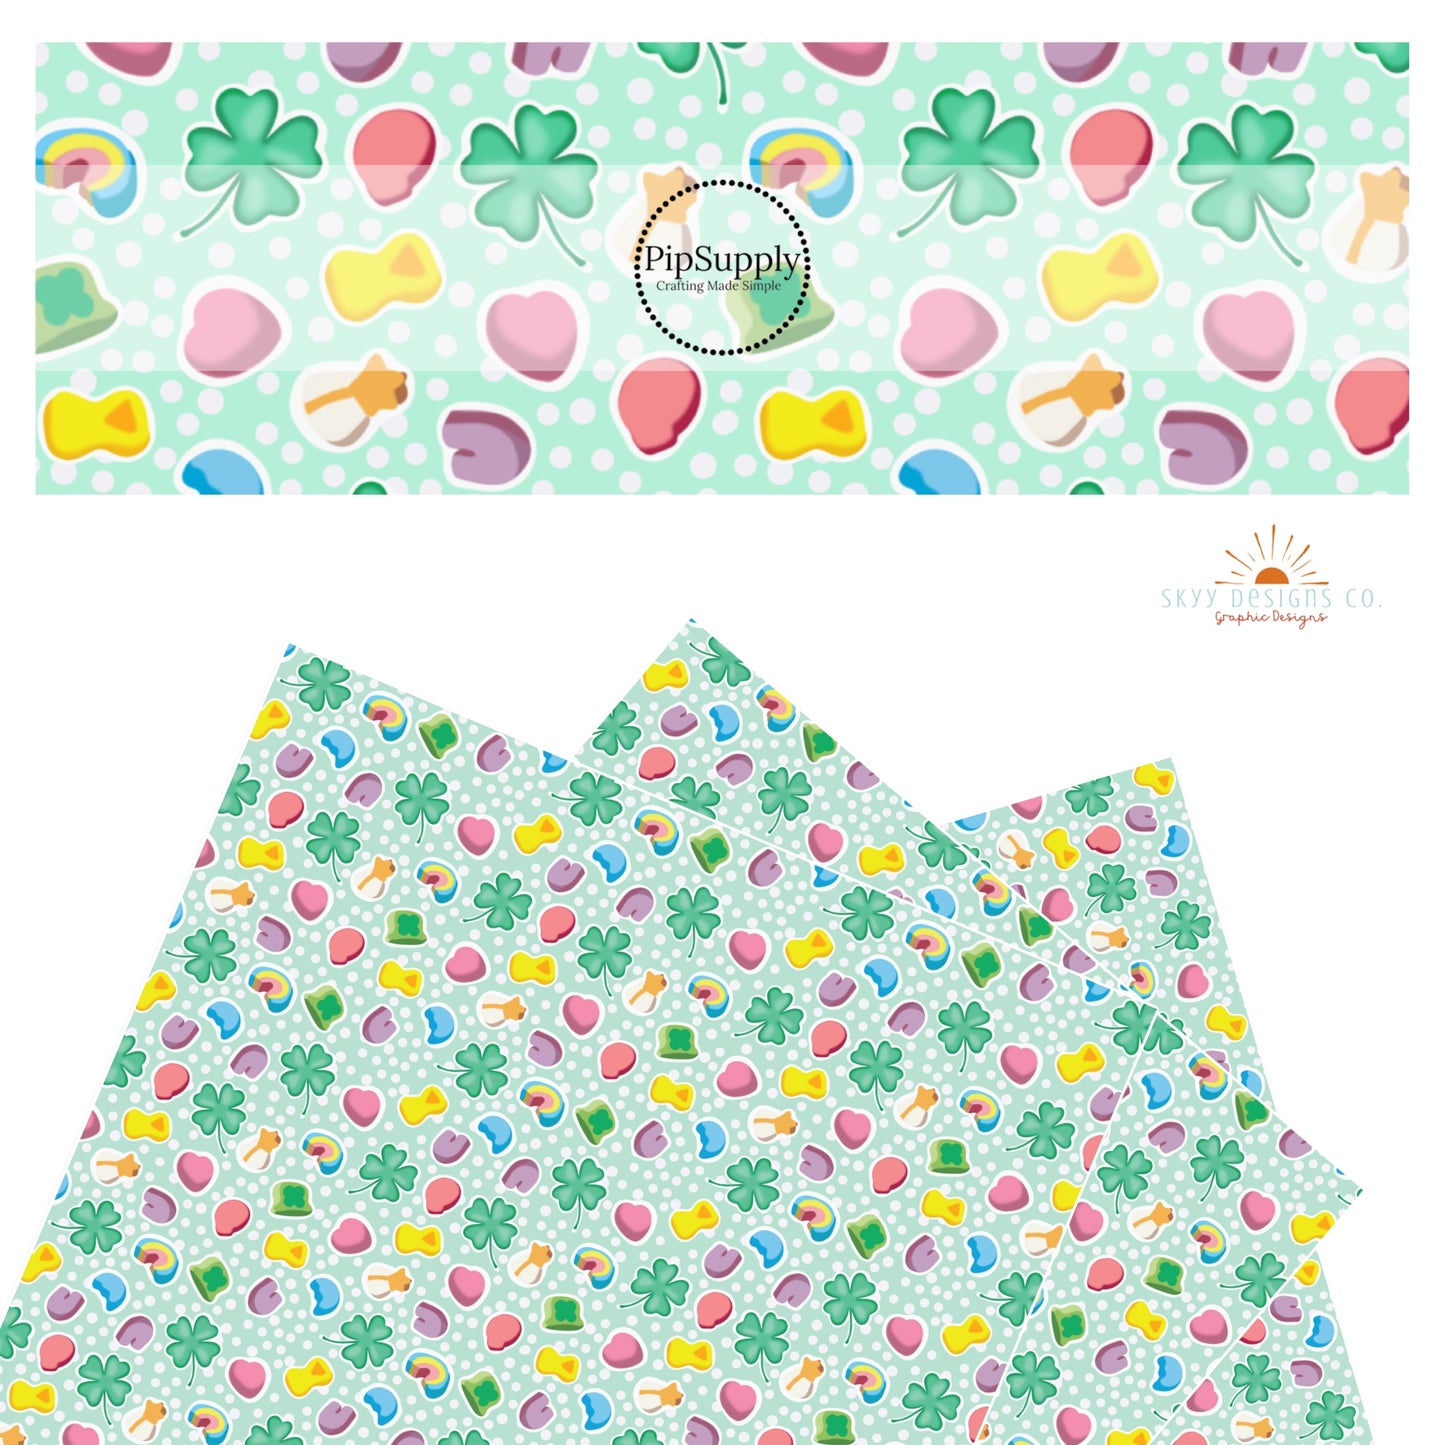 Green clovers, rainbows, pink hearts, shooting stars, and balloon marshmallows on a green polka dot faux leather sheet